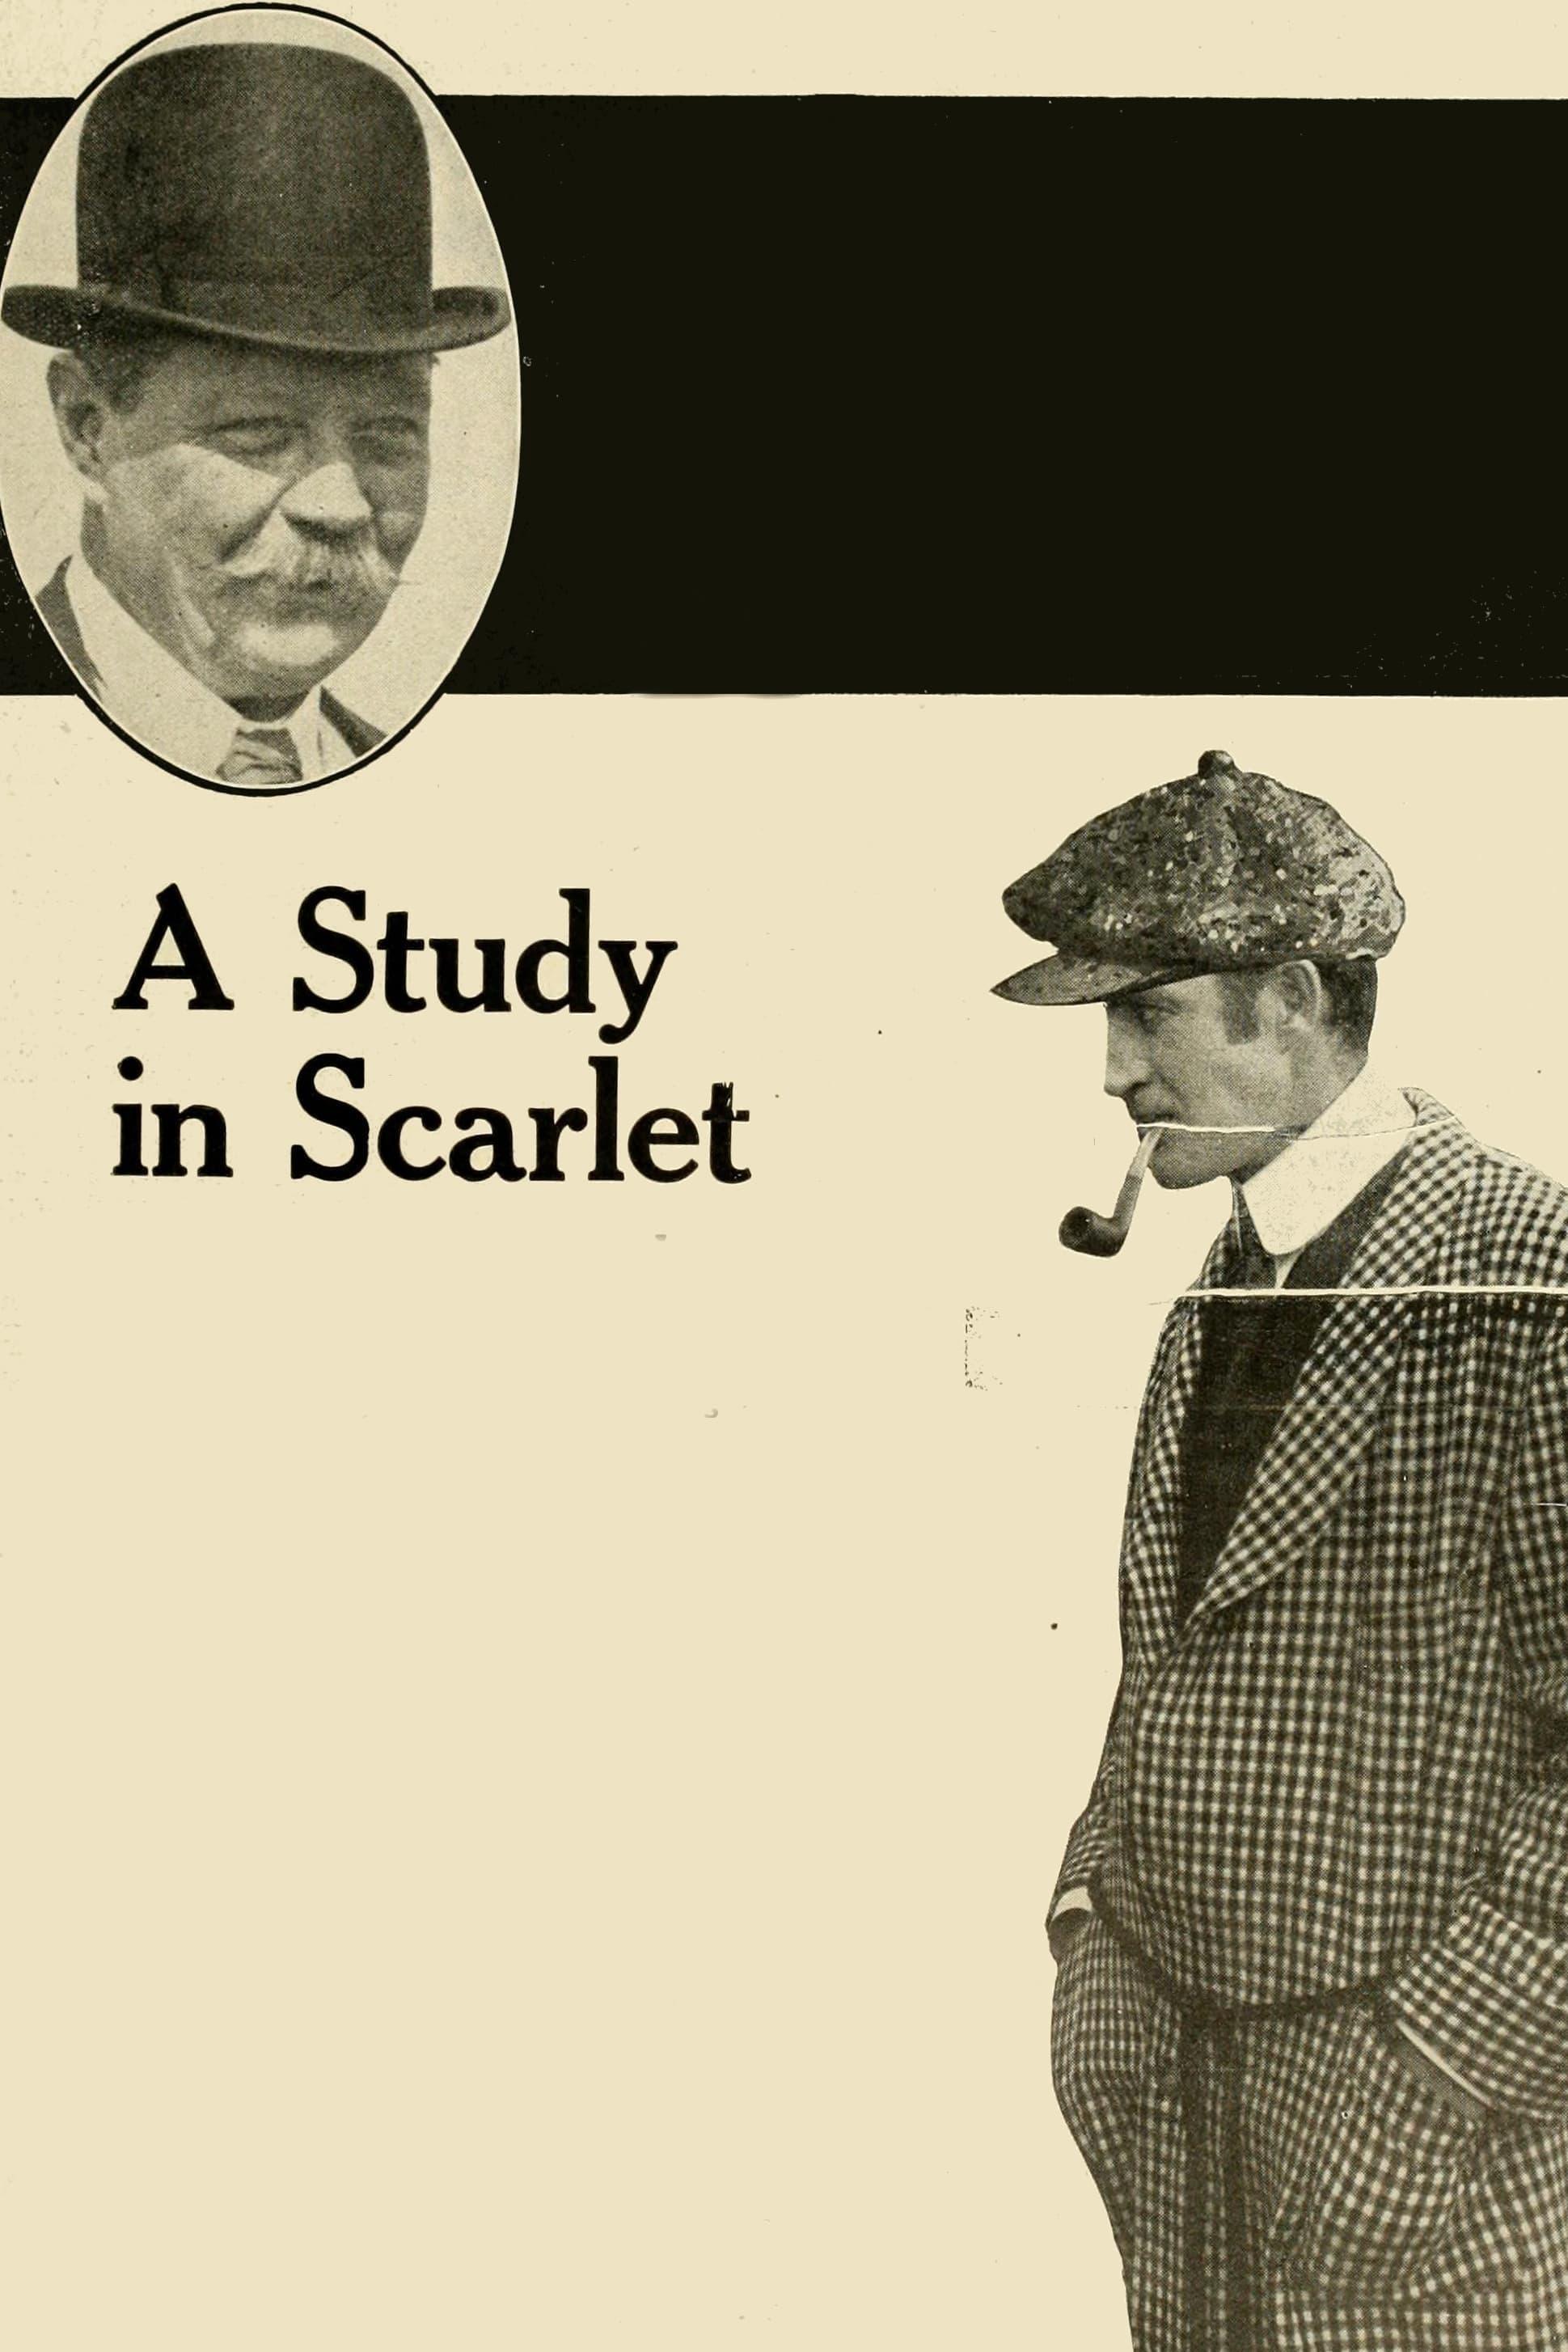 A Study in Scarlet poster